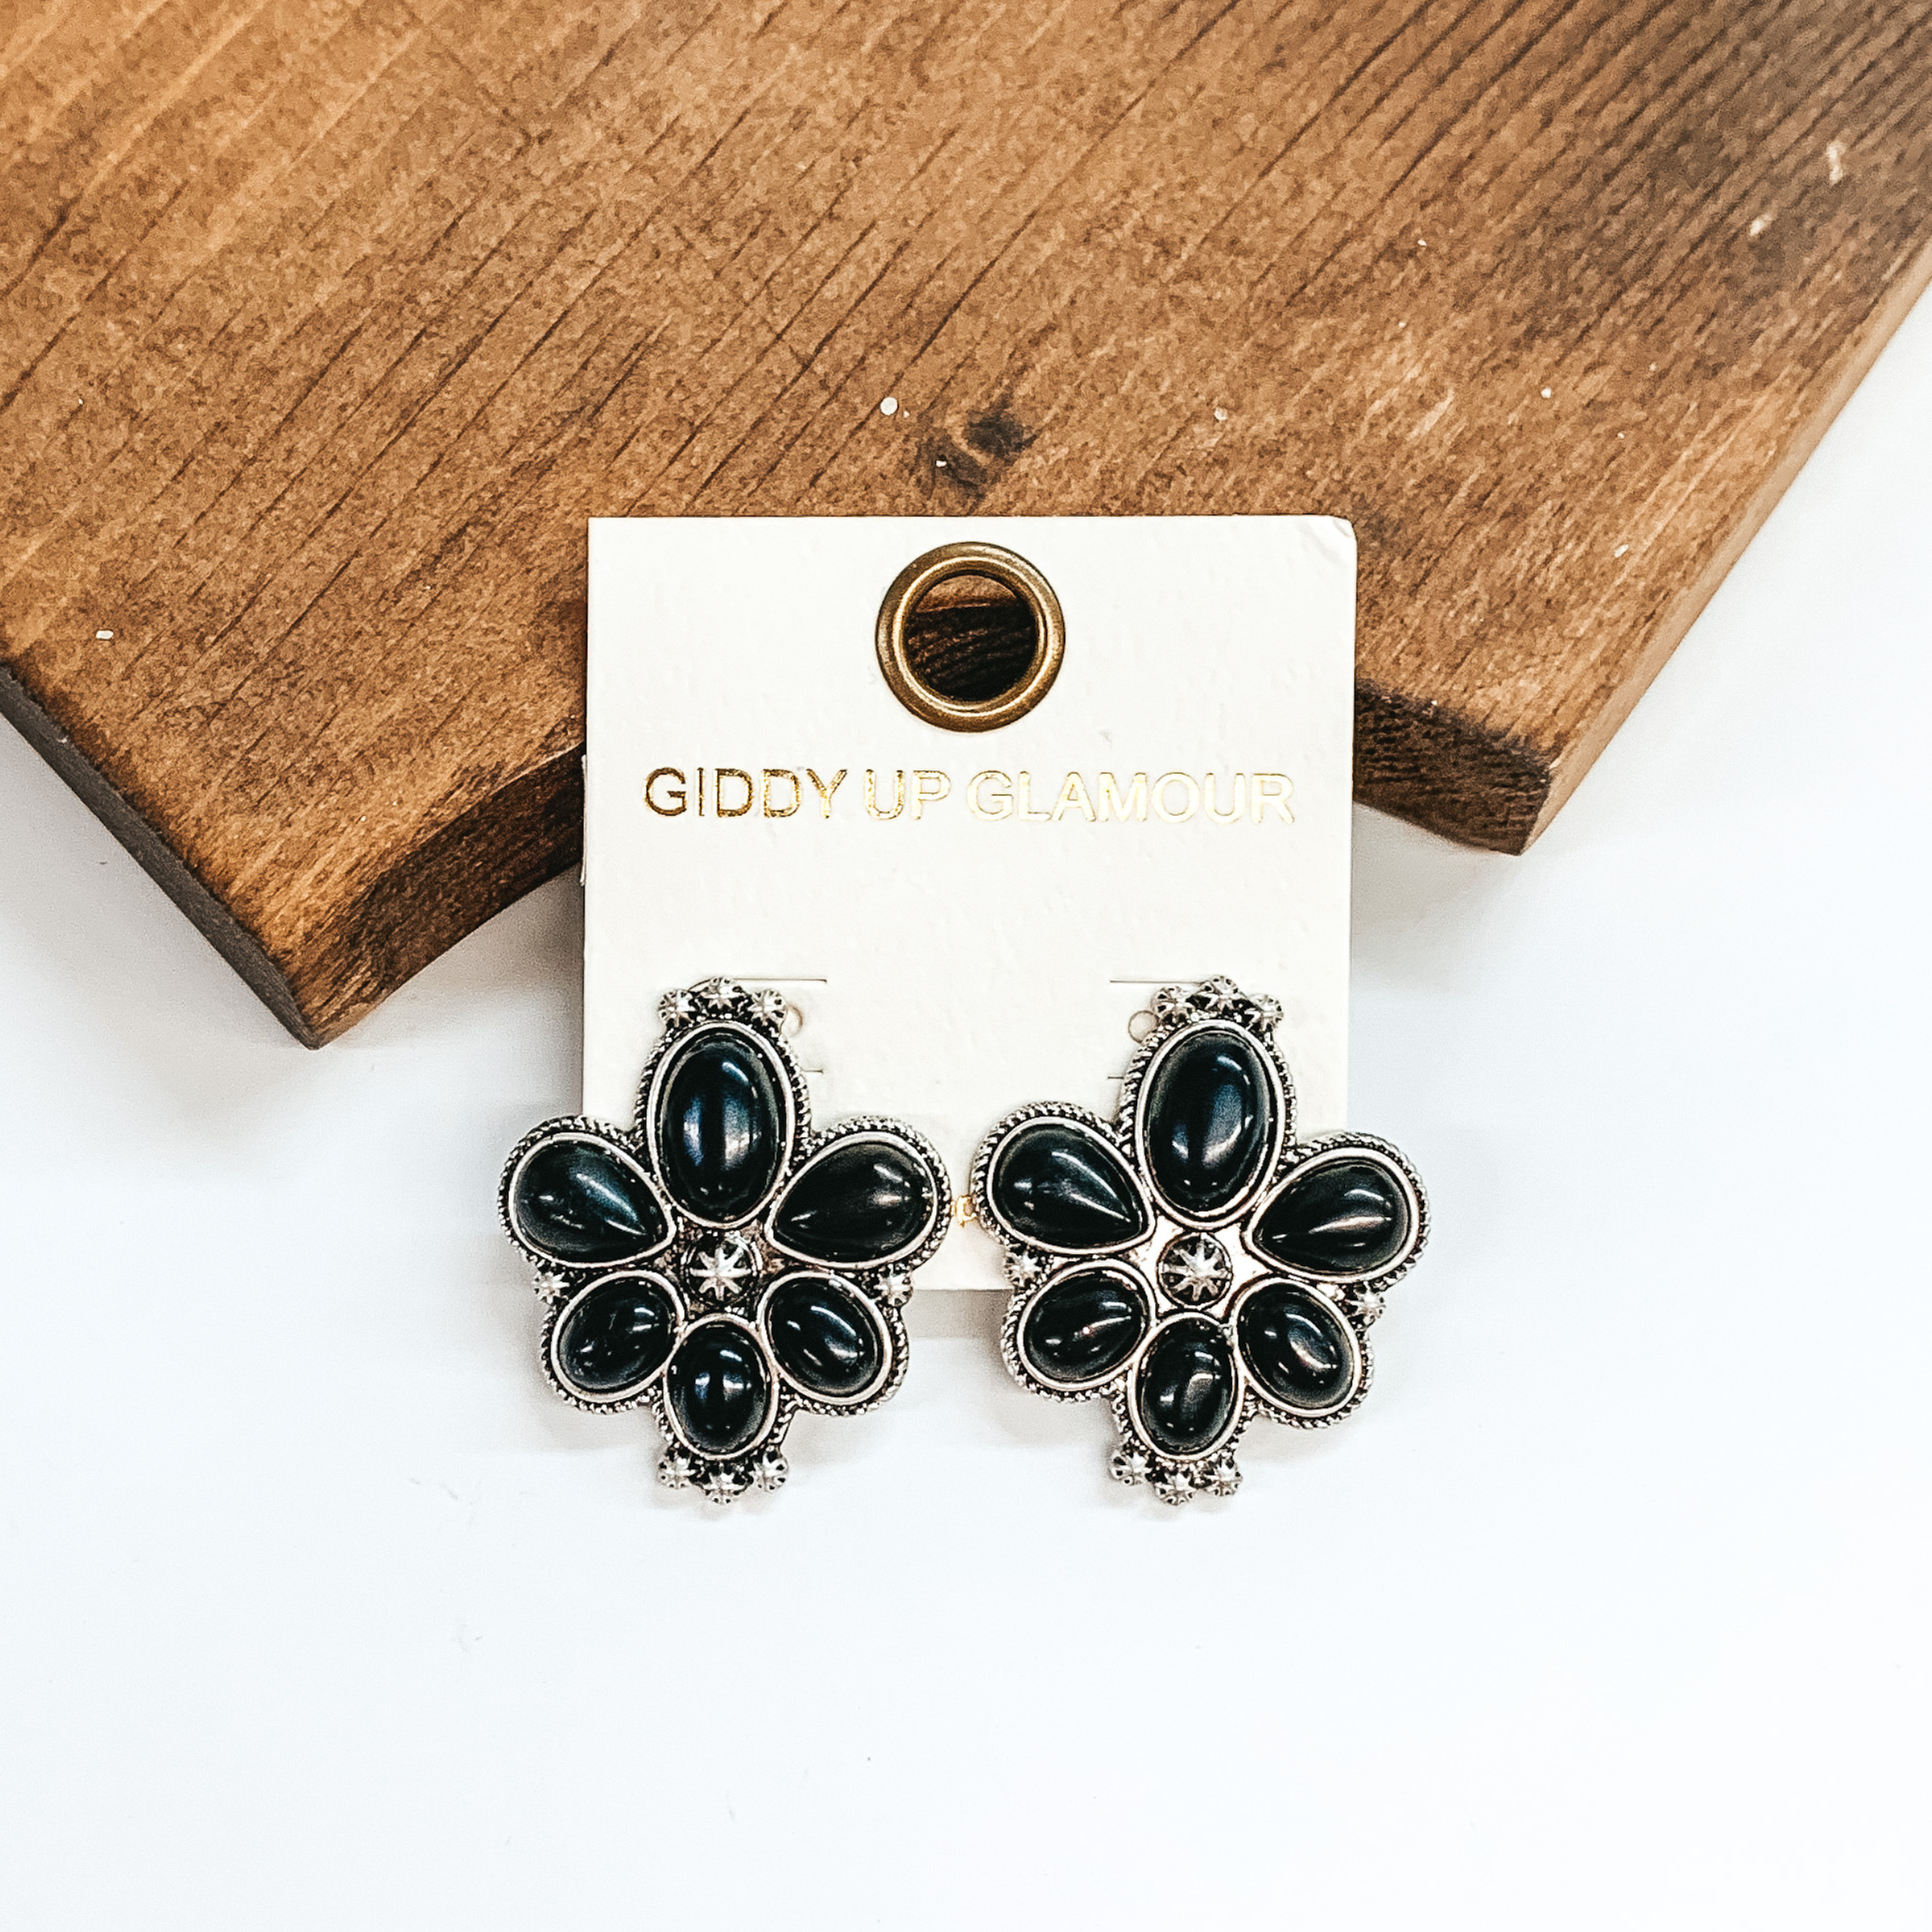 Six black stone cluster earrings. These earrings are pictured leaning against a brown block on a white background.